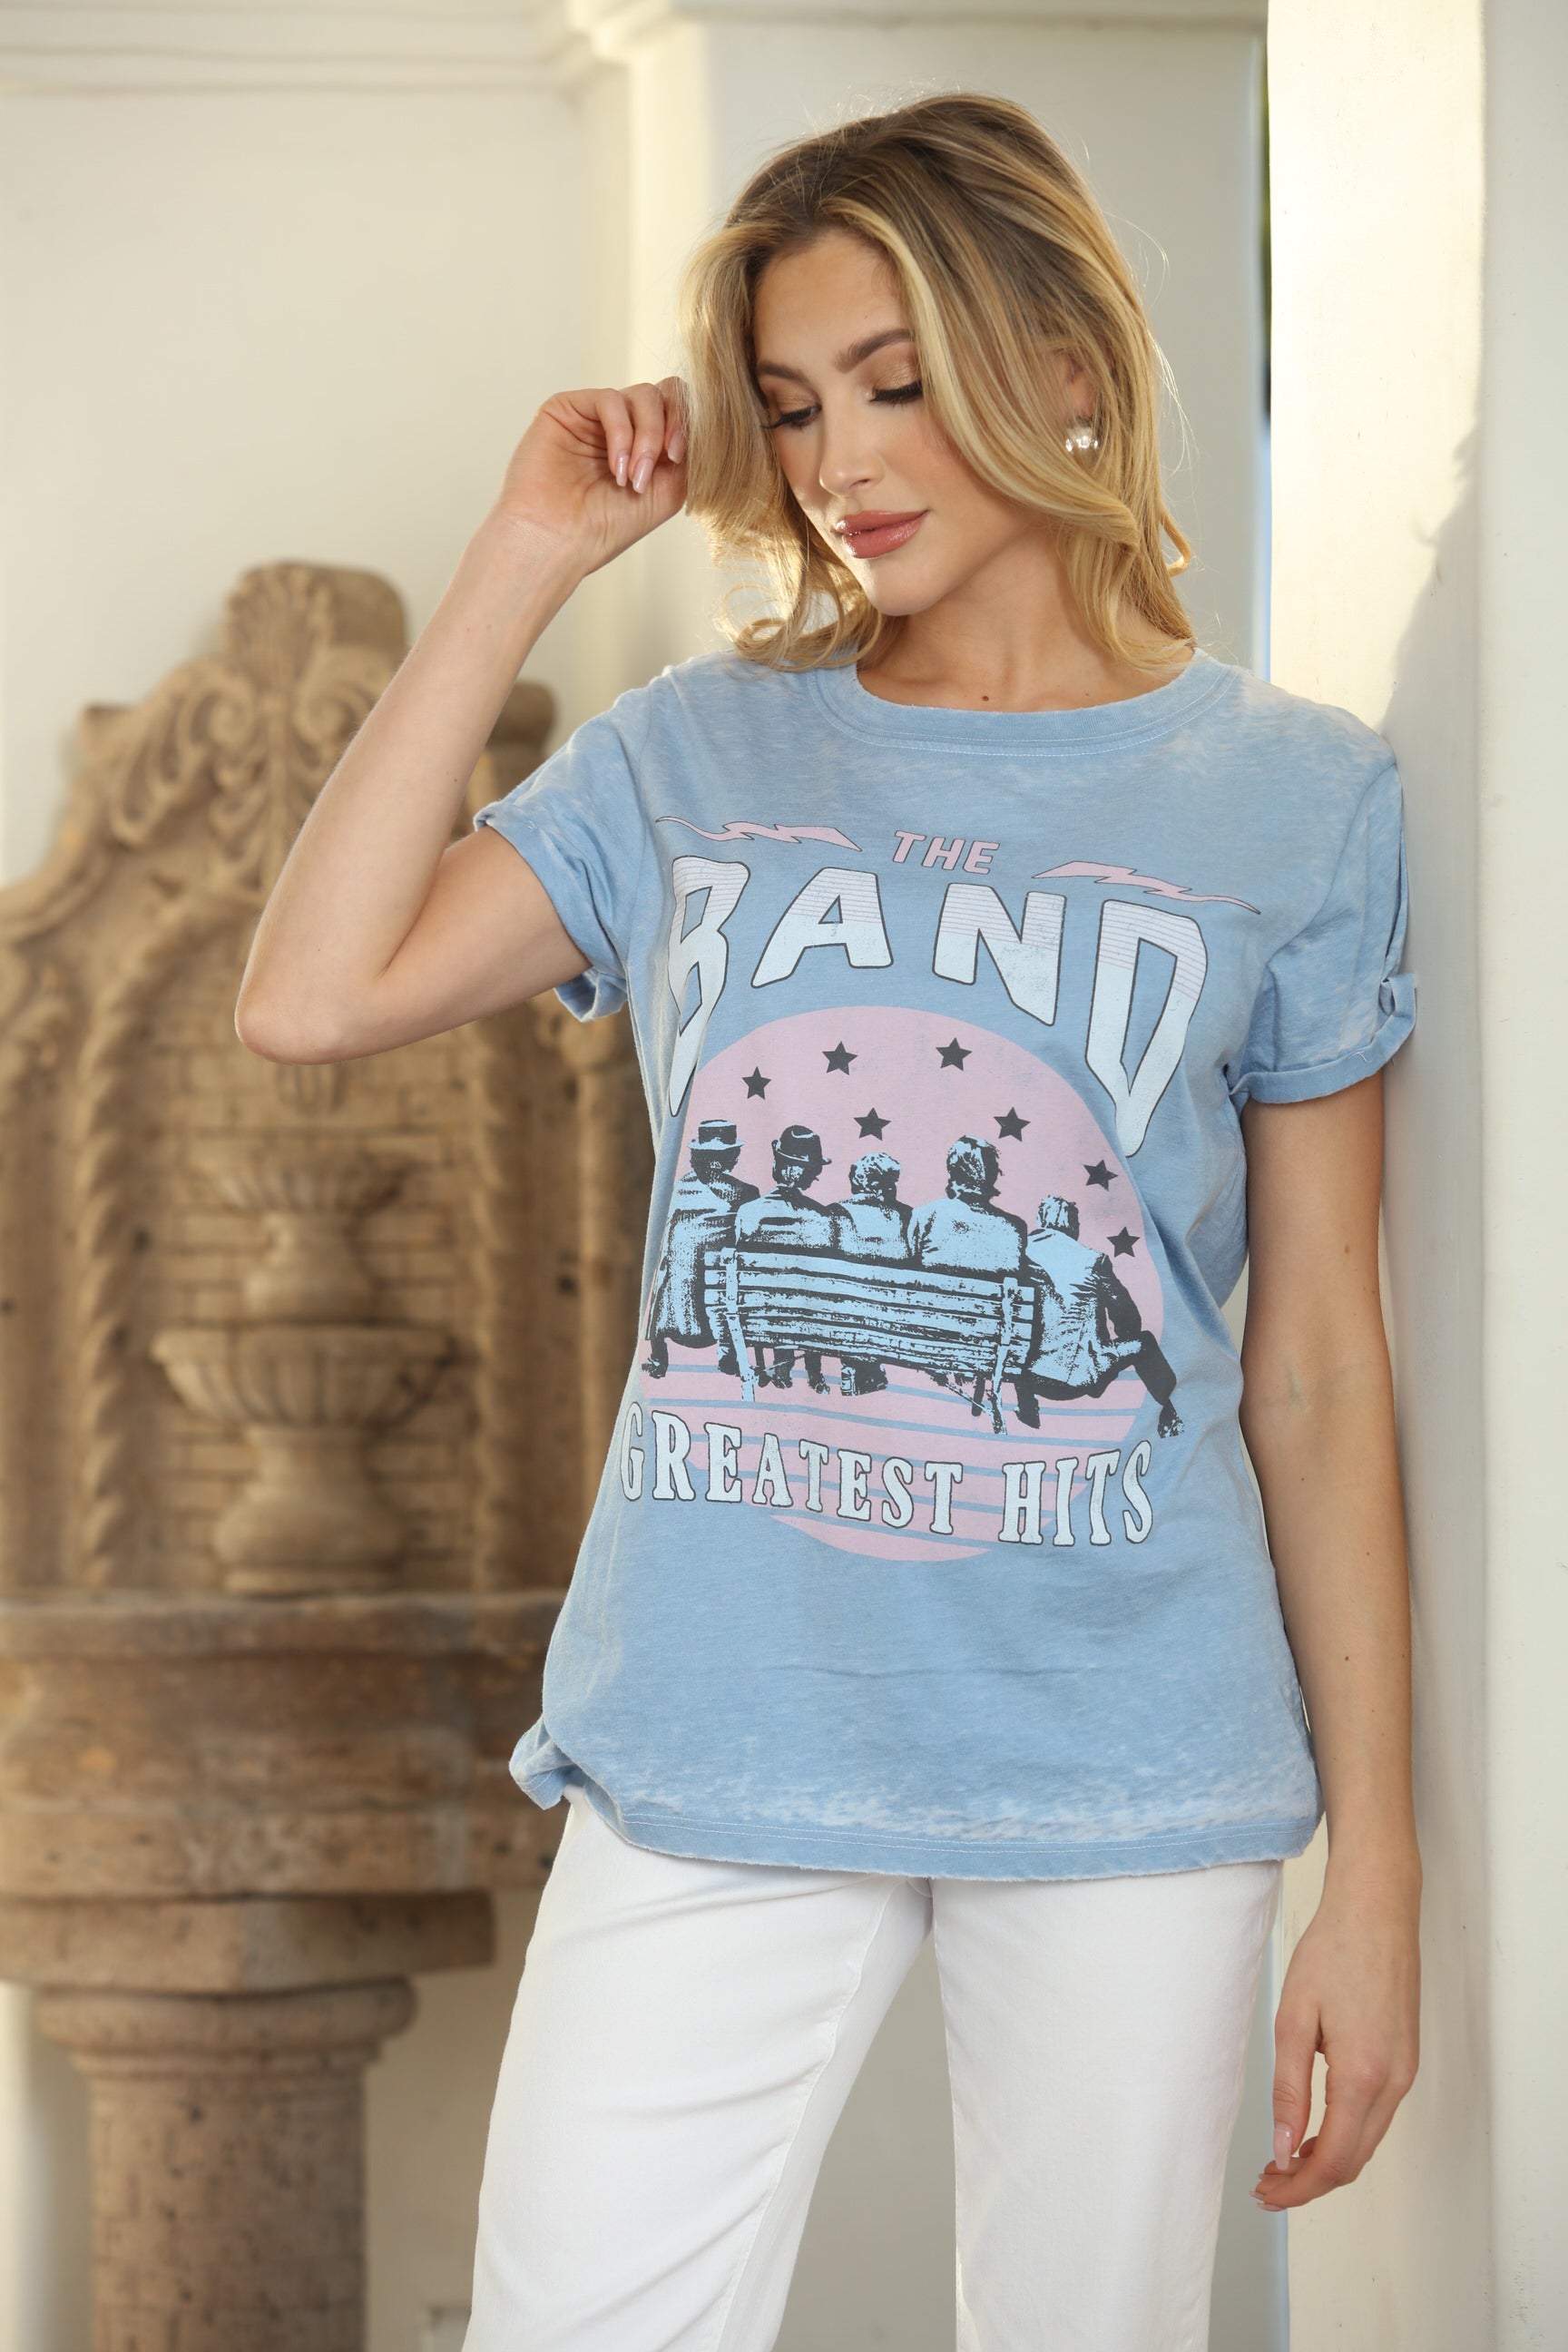 The Band Greatest Hits Tee